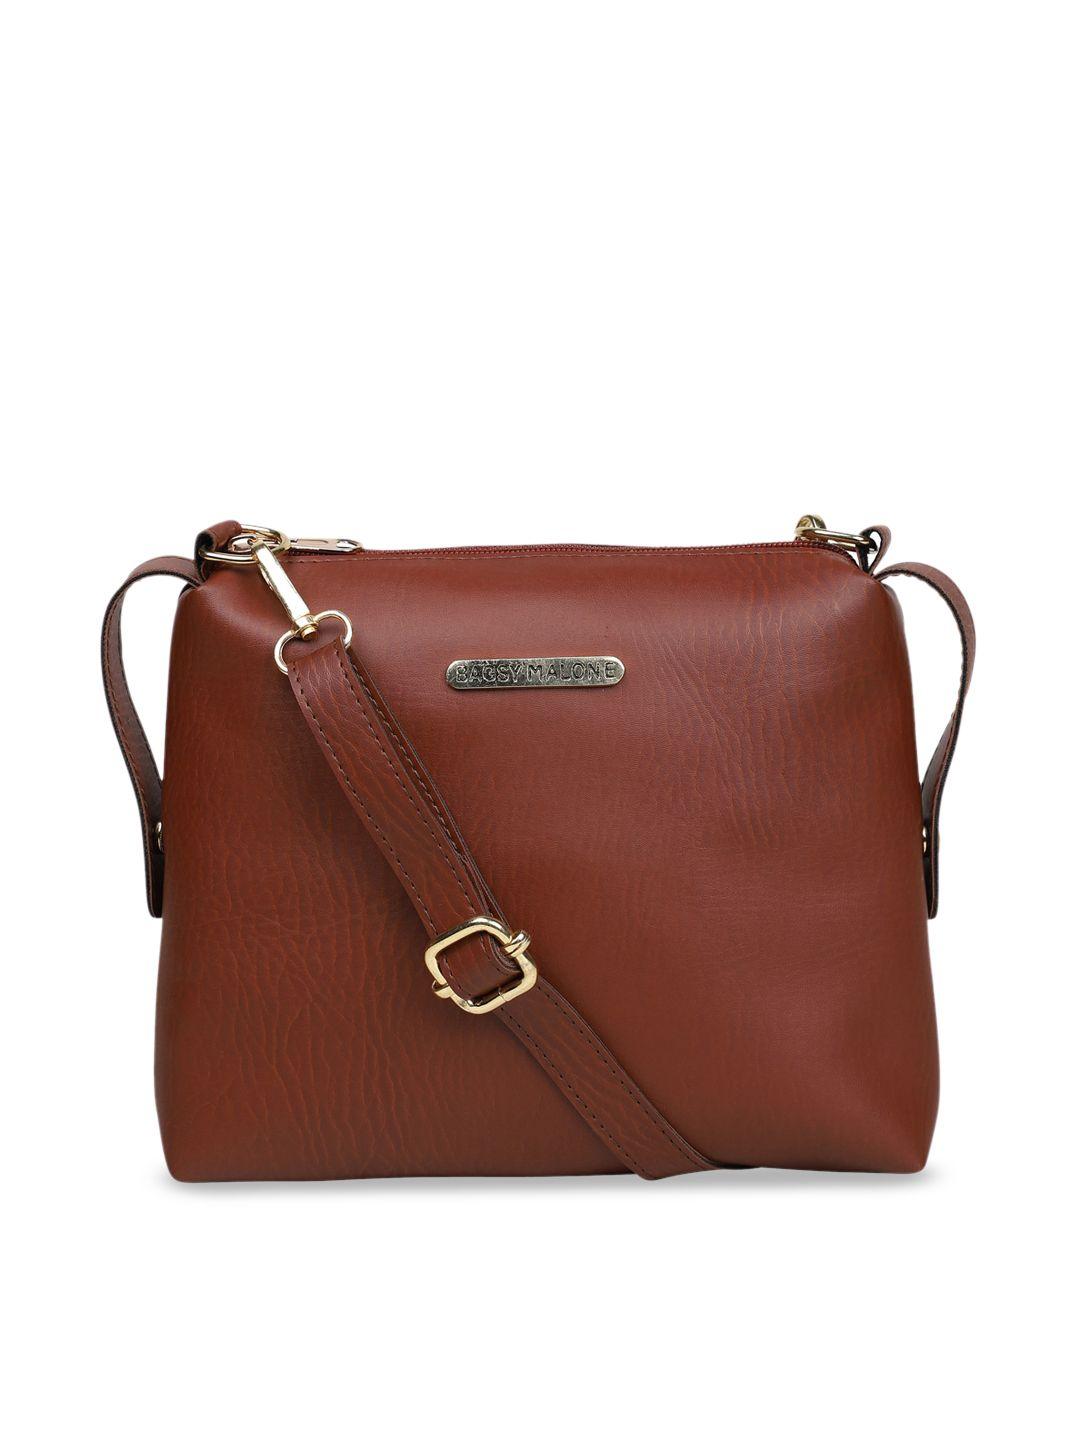 bagsy malone pu bucket sling bag with tasselled